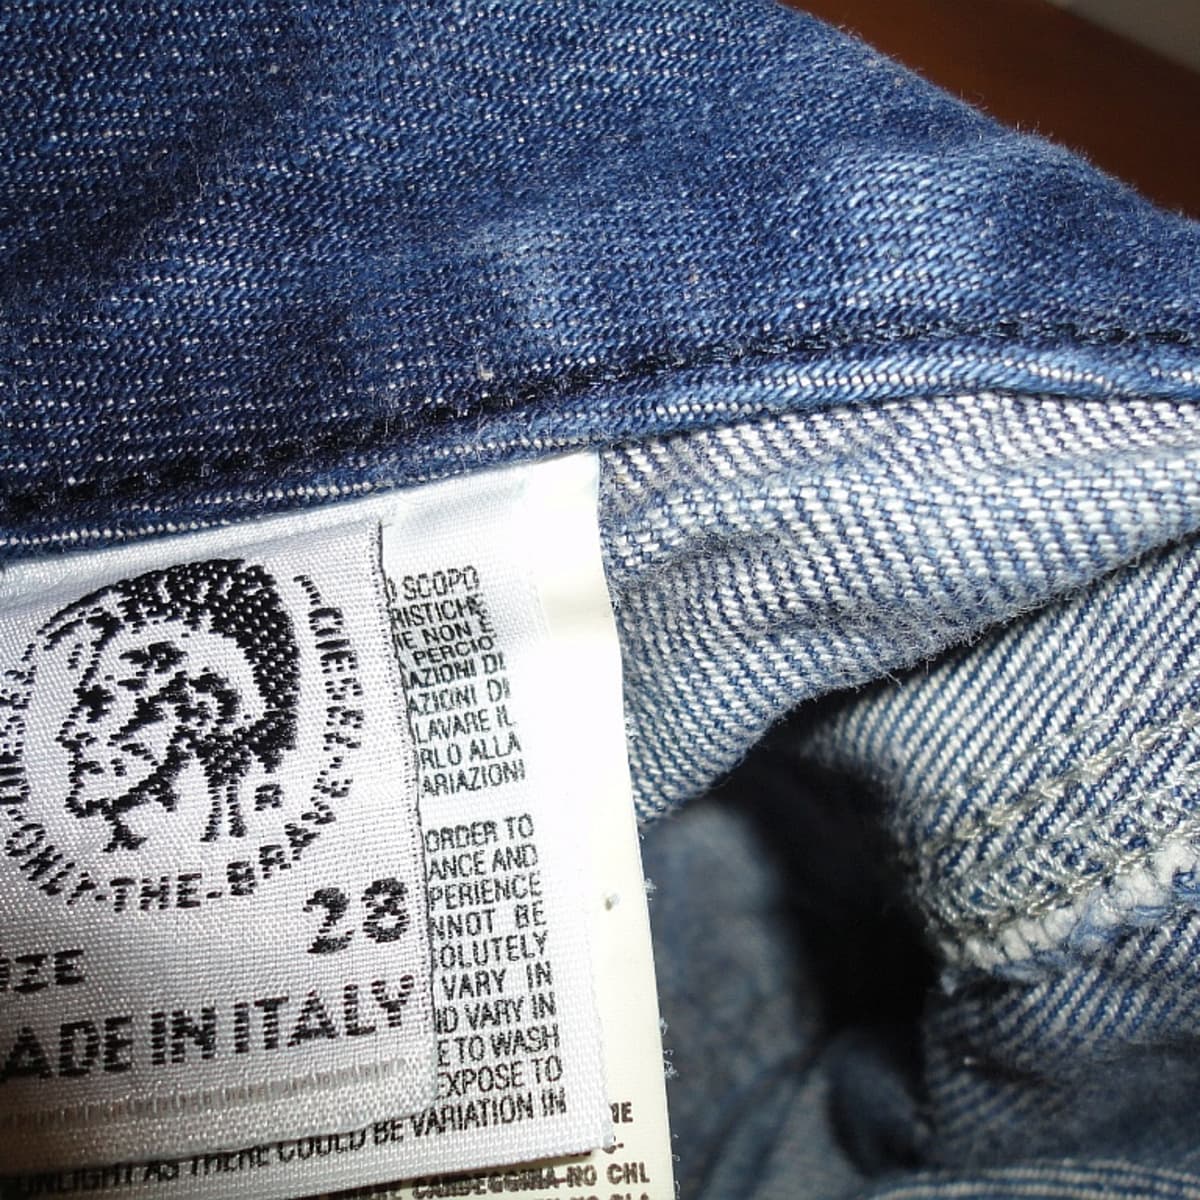 Trauern Aussprache Buch authentic clothing company jeans Mantel Moral